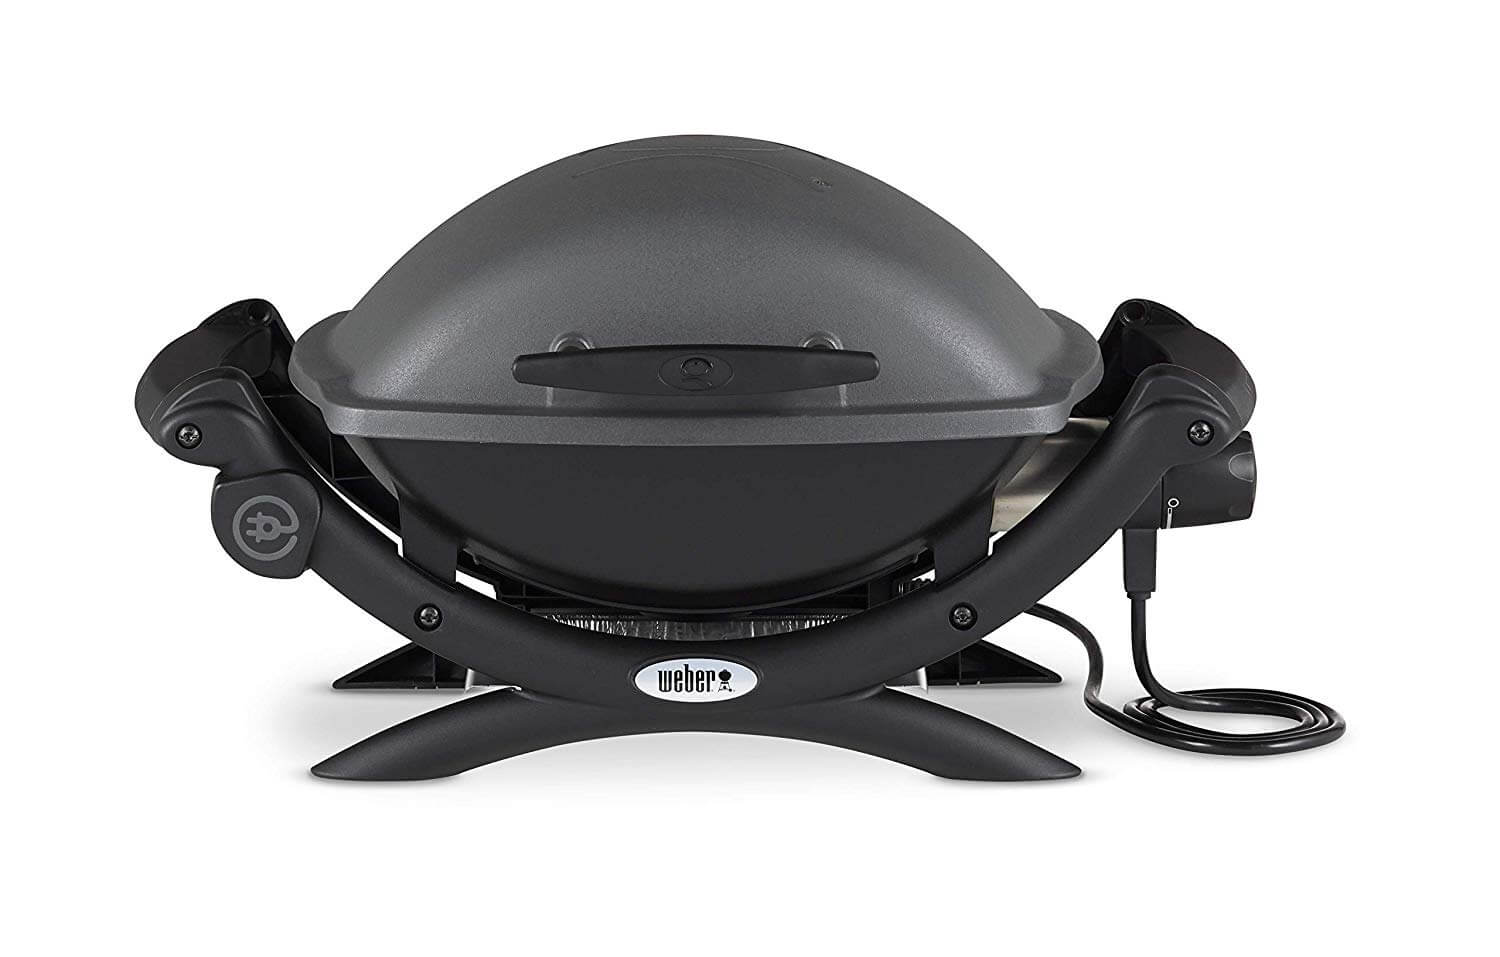 3. Weber 52020001 Q1400 Electric Grill